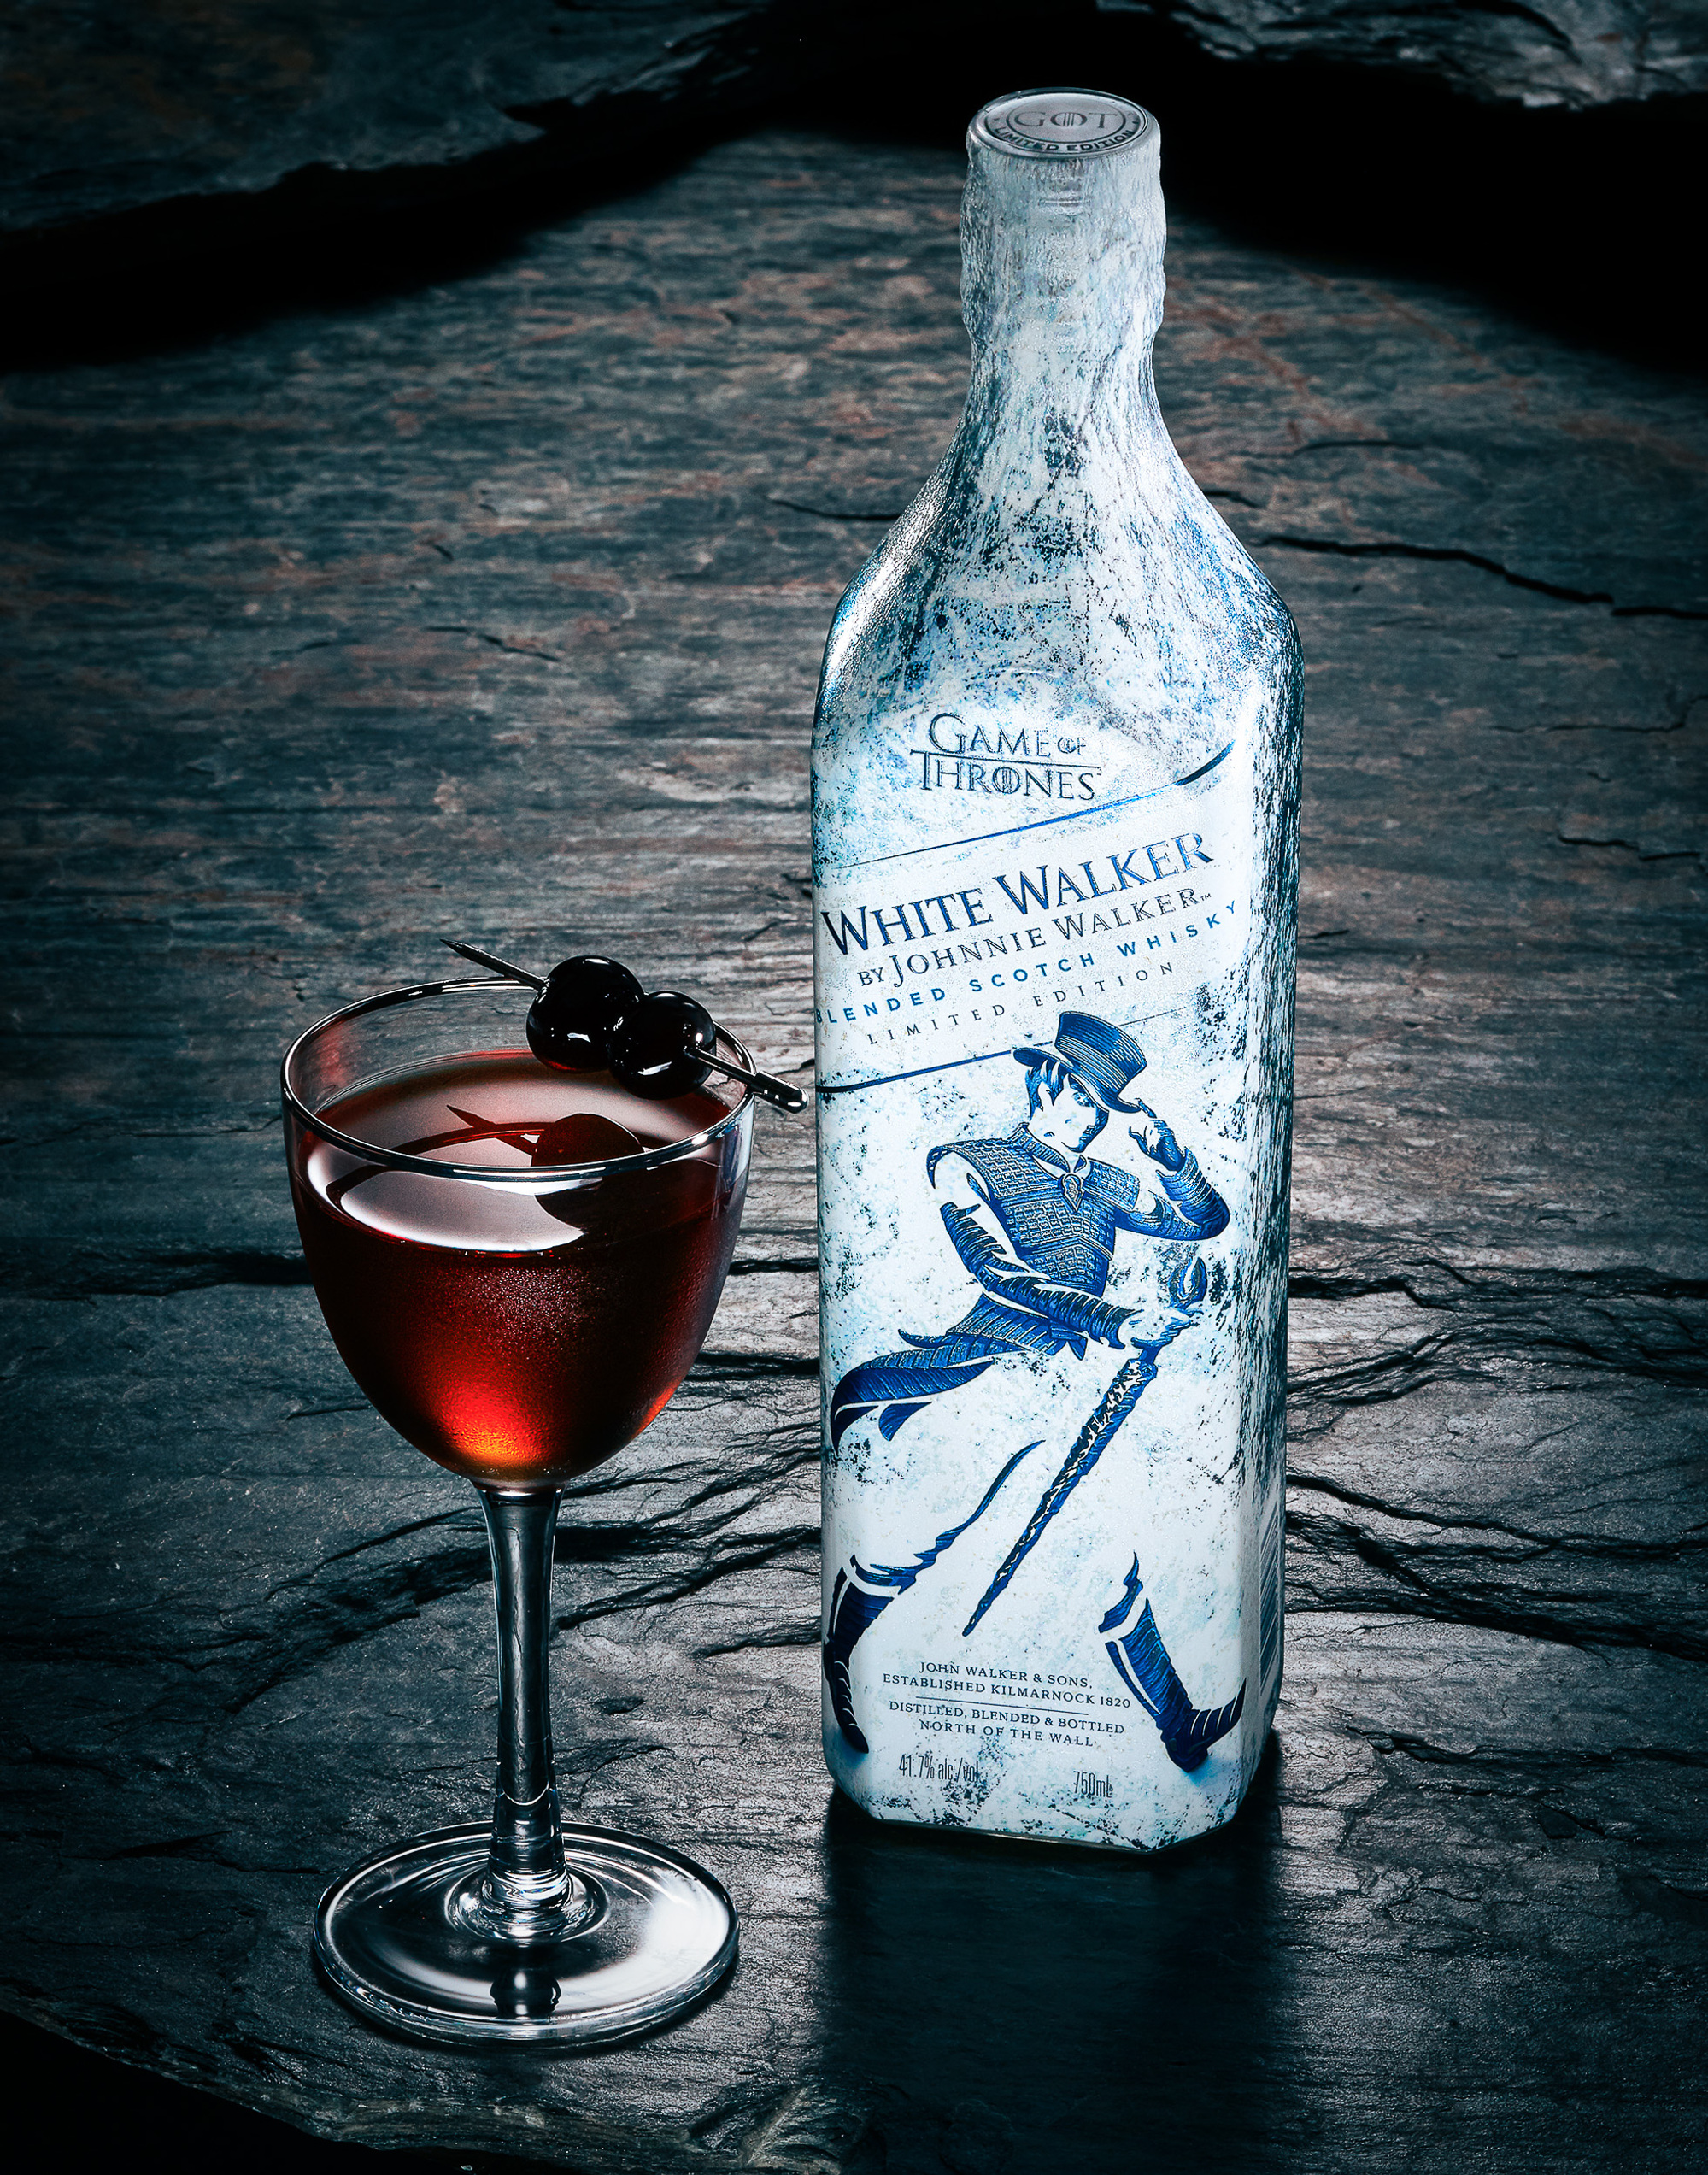 Johnnie Walker White Walker bottle and cocktail by beverage photographer Timothy Hogan. 

Beverages and alcohol product & advertising photography by Timothy Hogan Studio in Los Angeles